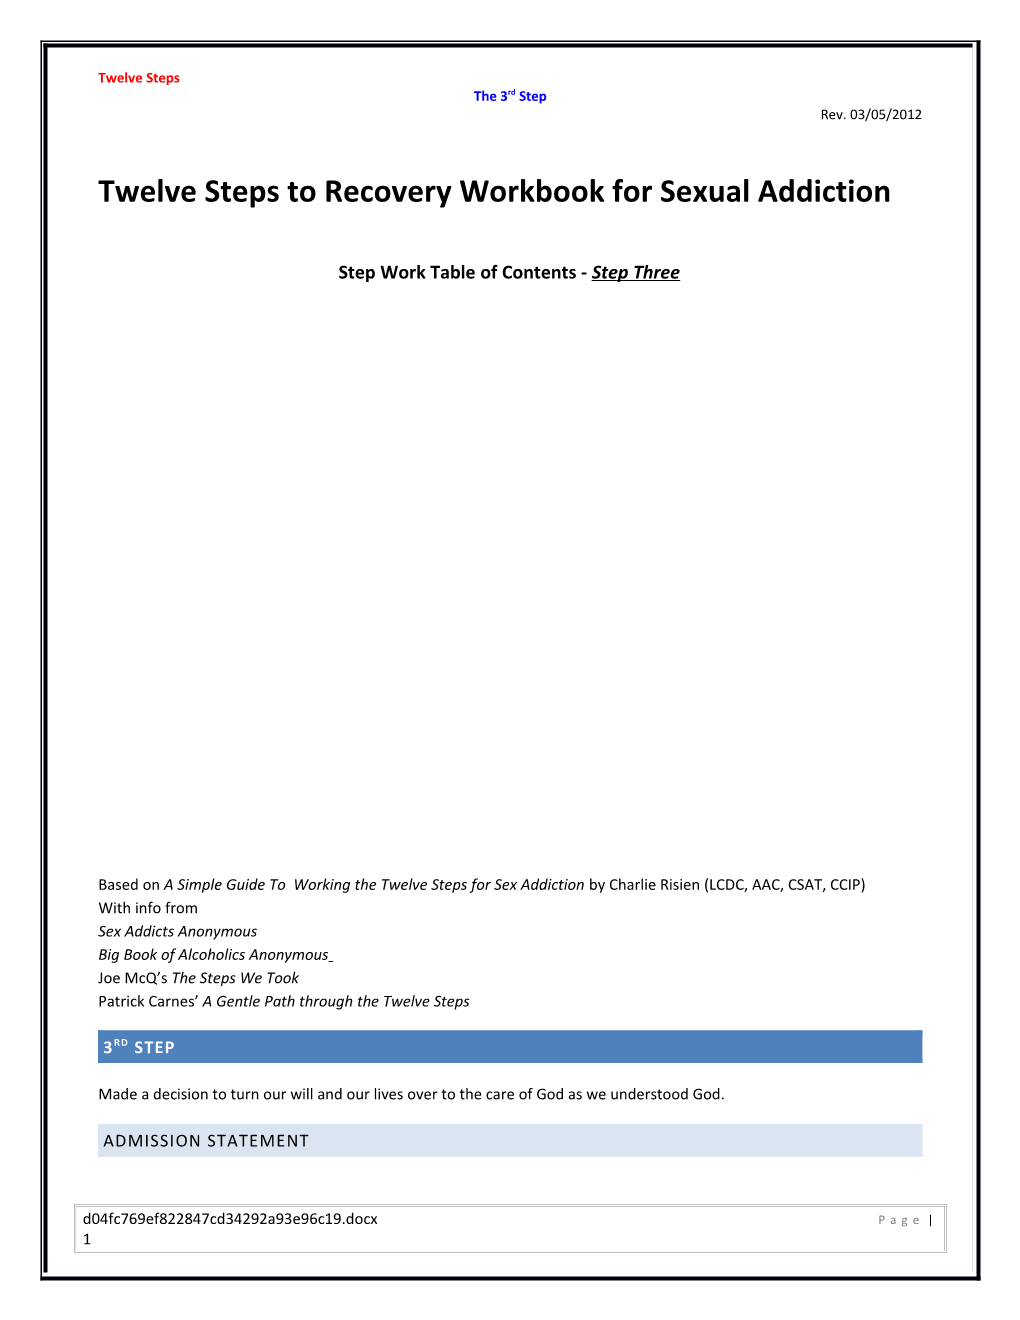 Twelve Steps to Recovery Workbook for Sexual Addiction